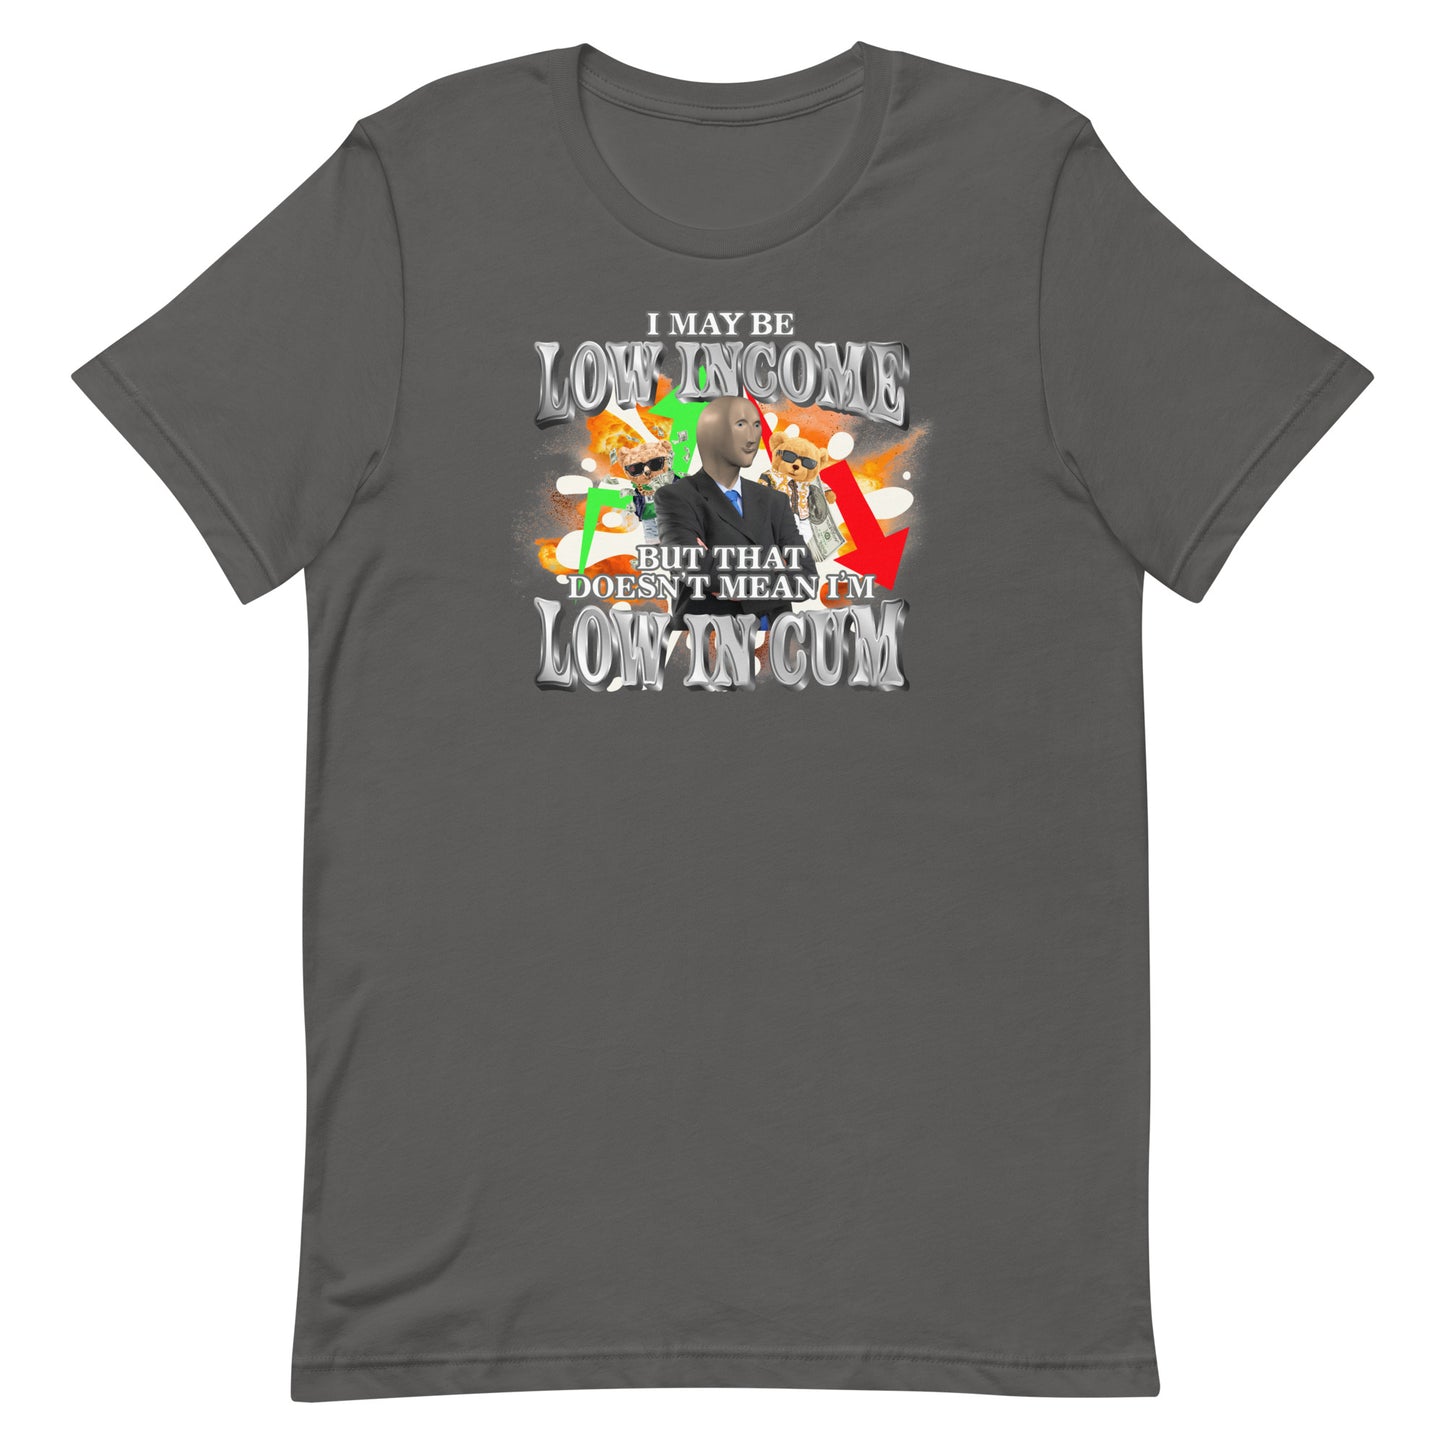 I May Be Low Income But That Doesn't Mean I'm Low in Cum Unisex t-shirt